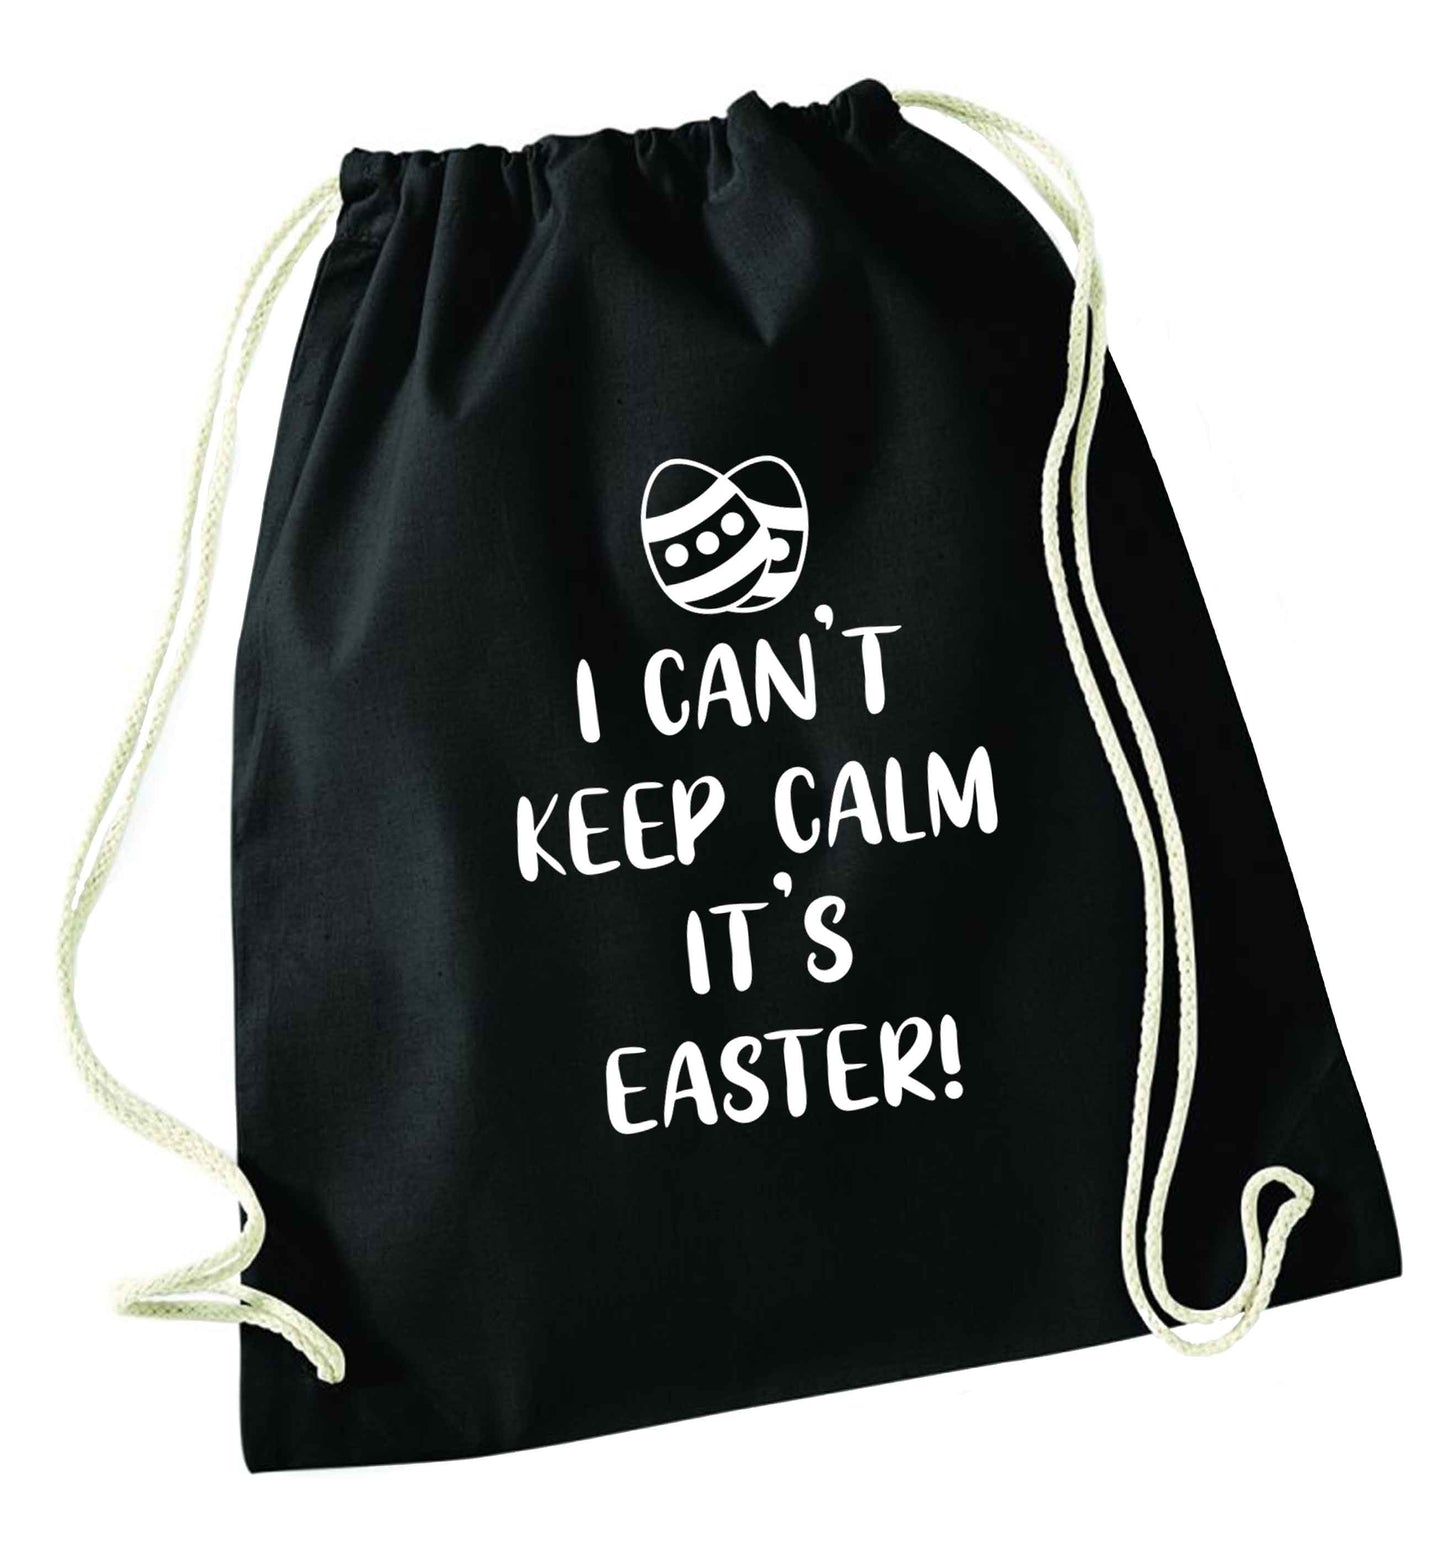 I can't keep calm it's Easter black drawstring bag